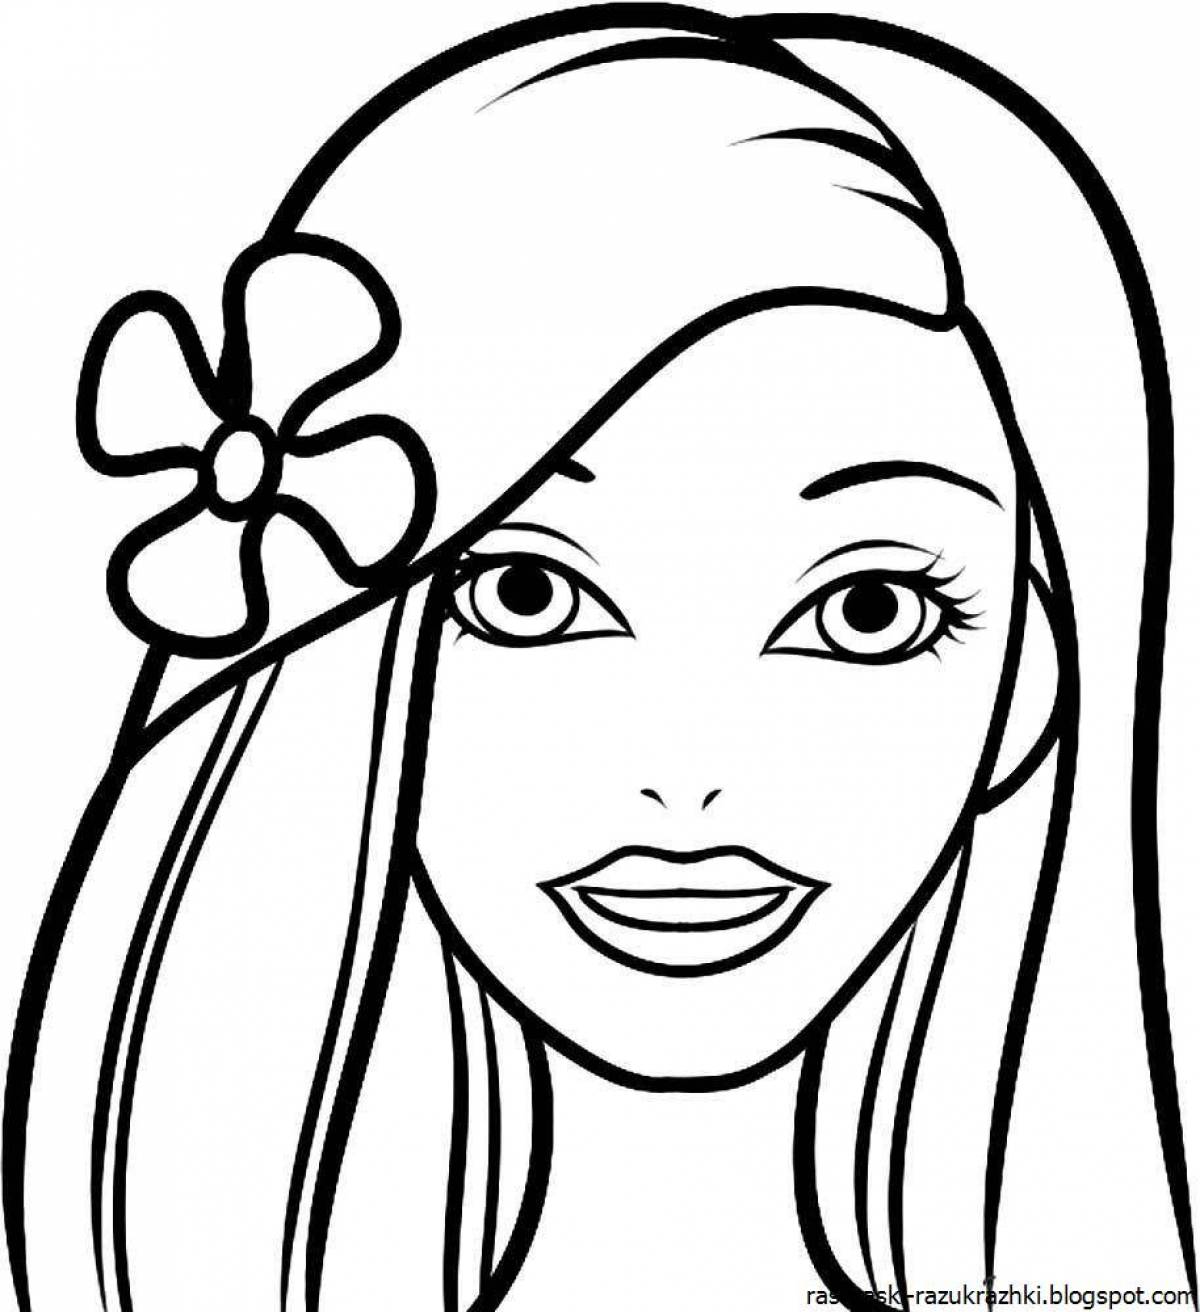 Coloring page playful makeup for girls